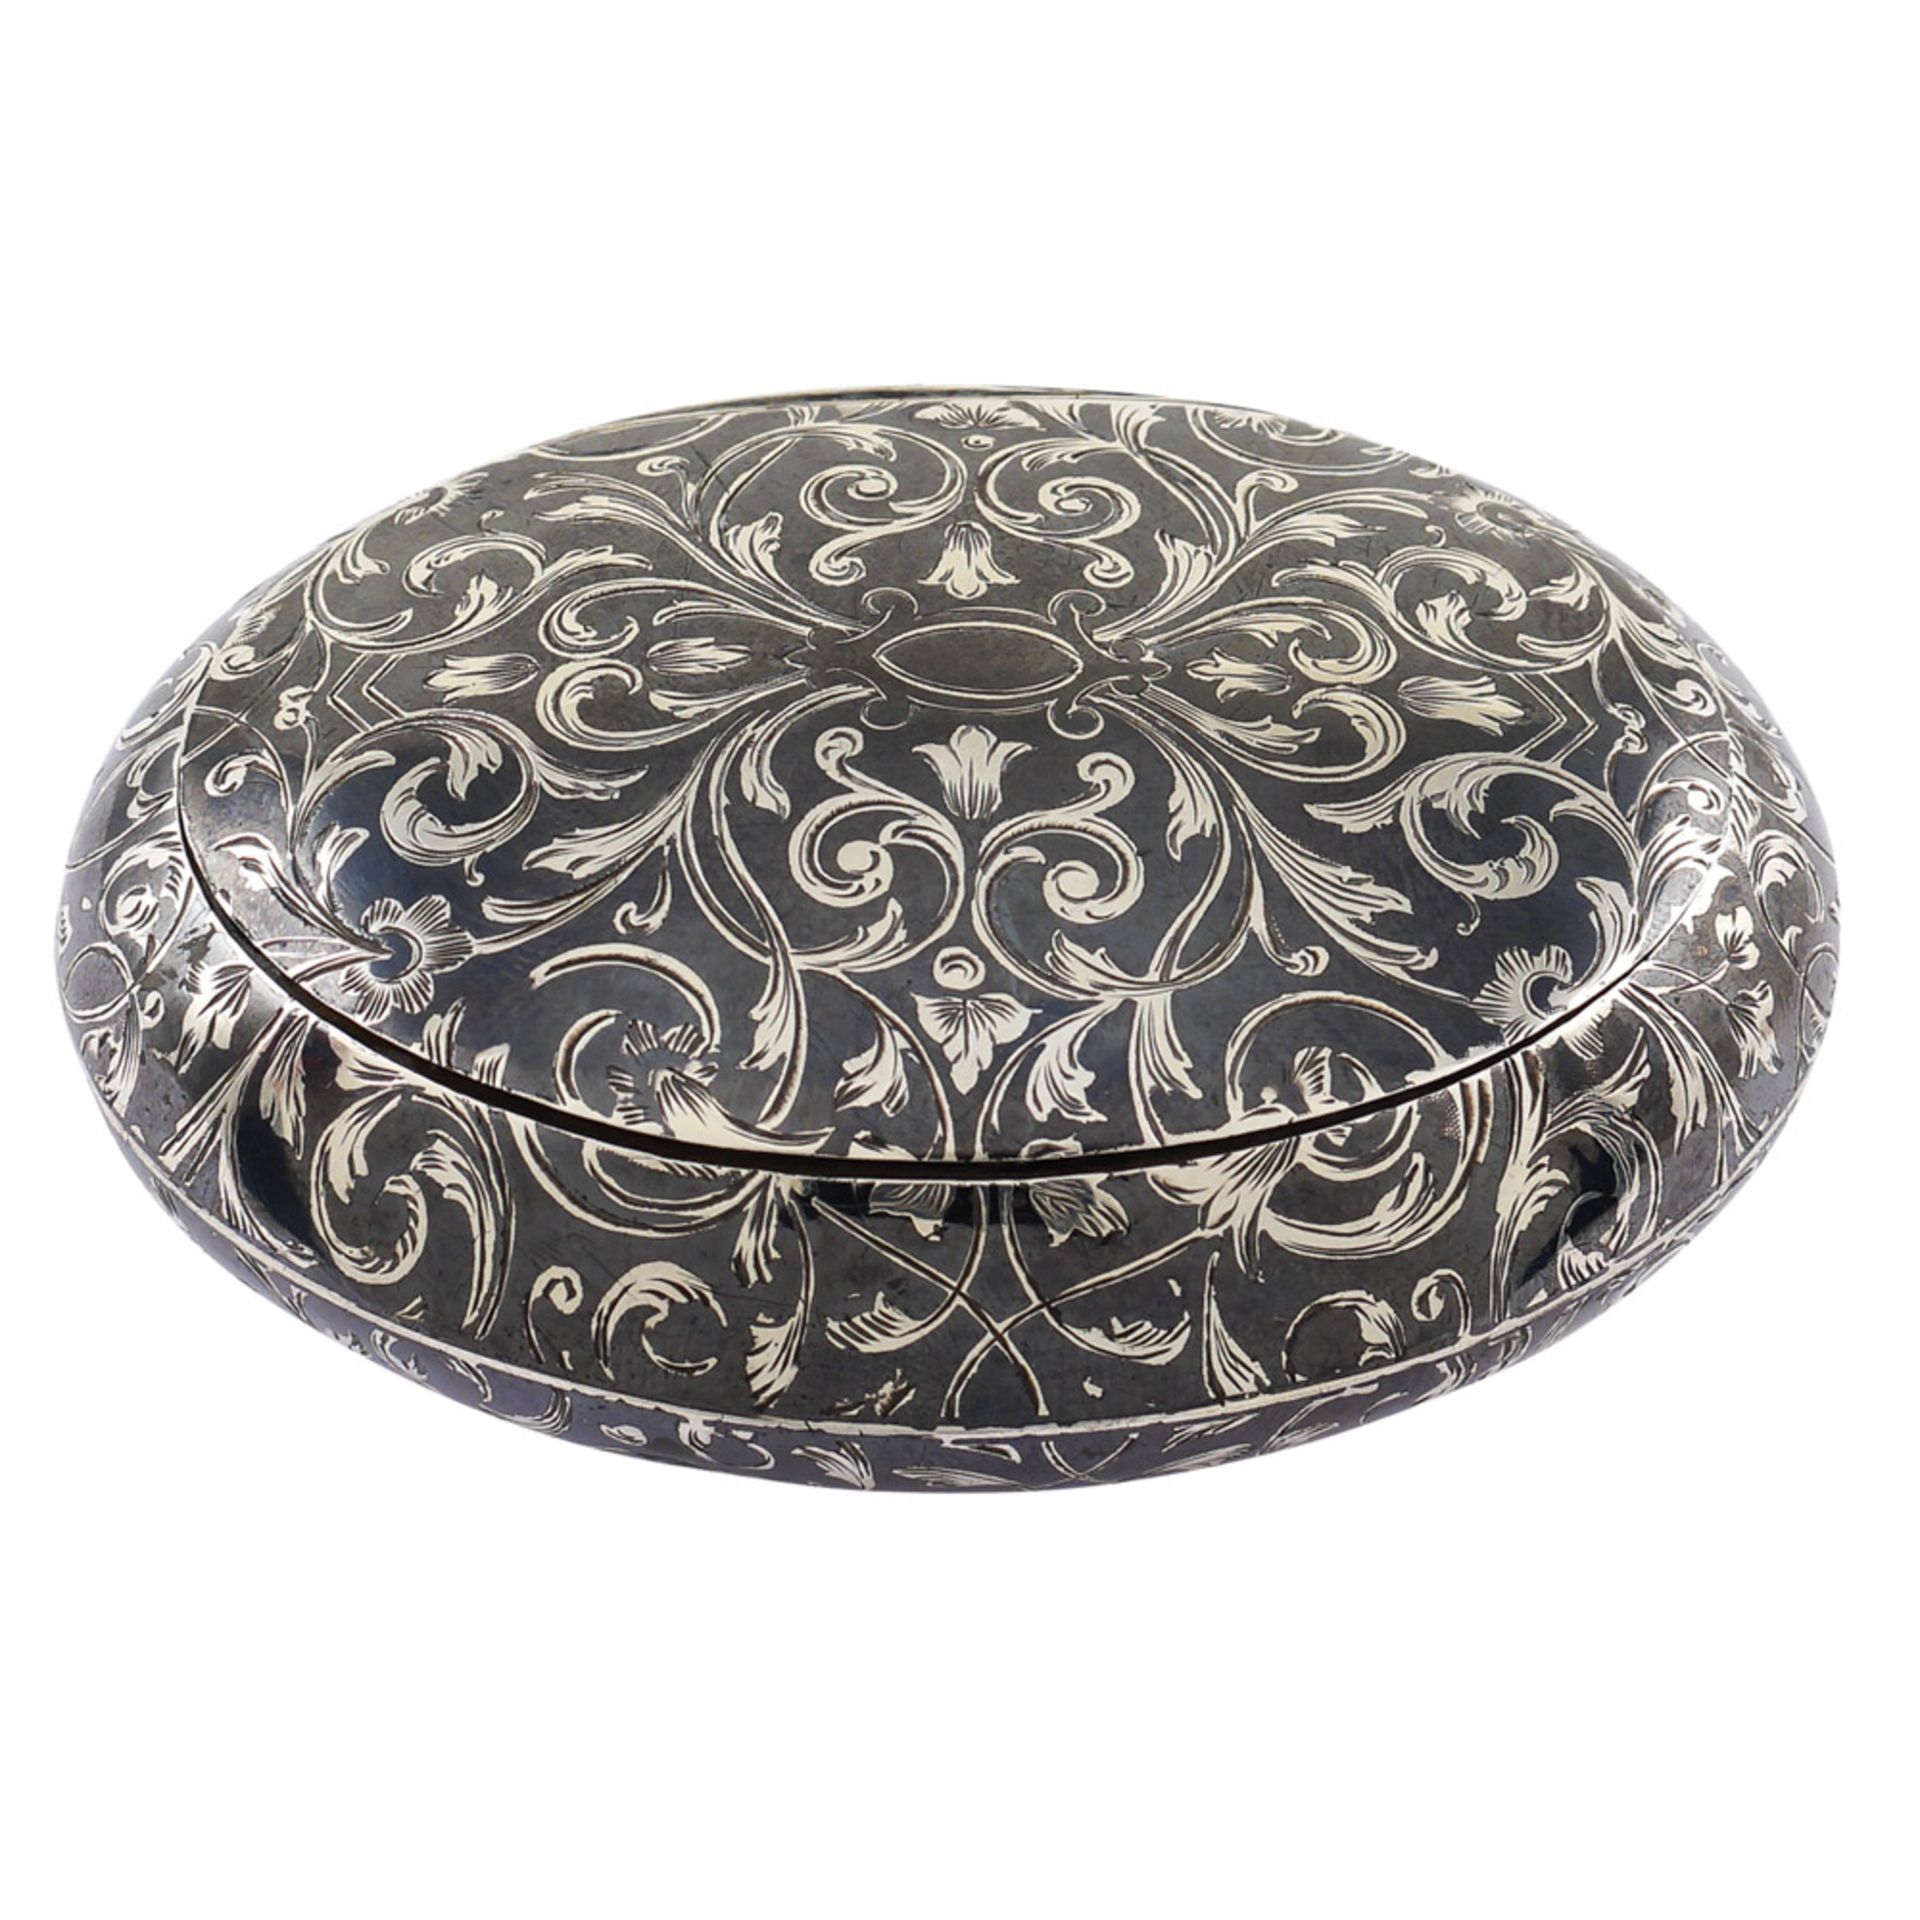 A silver niello snuffbox France, 19th century weight 70 gr. body engraved with volute plant